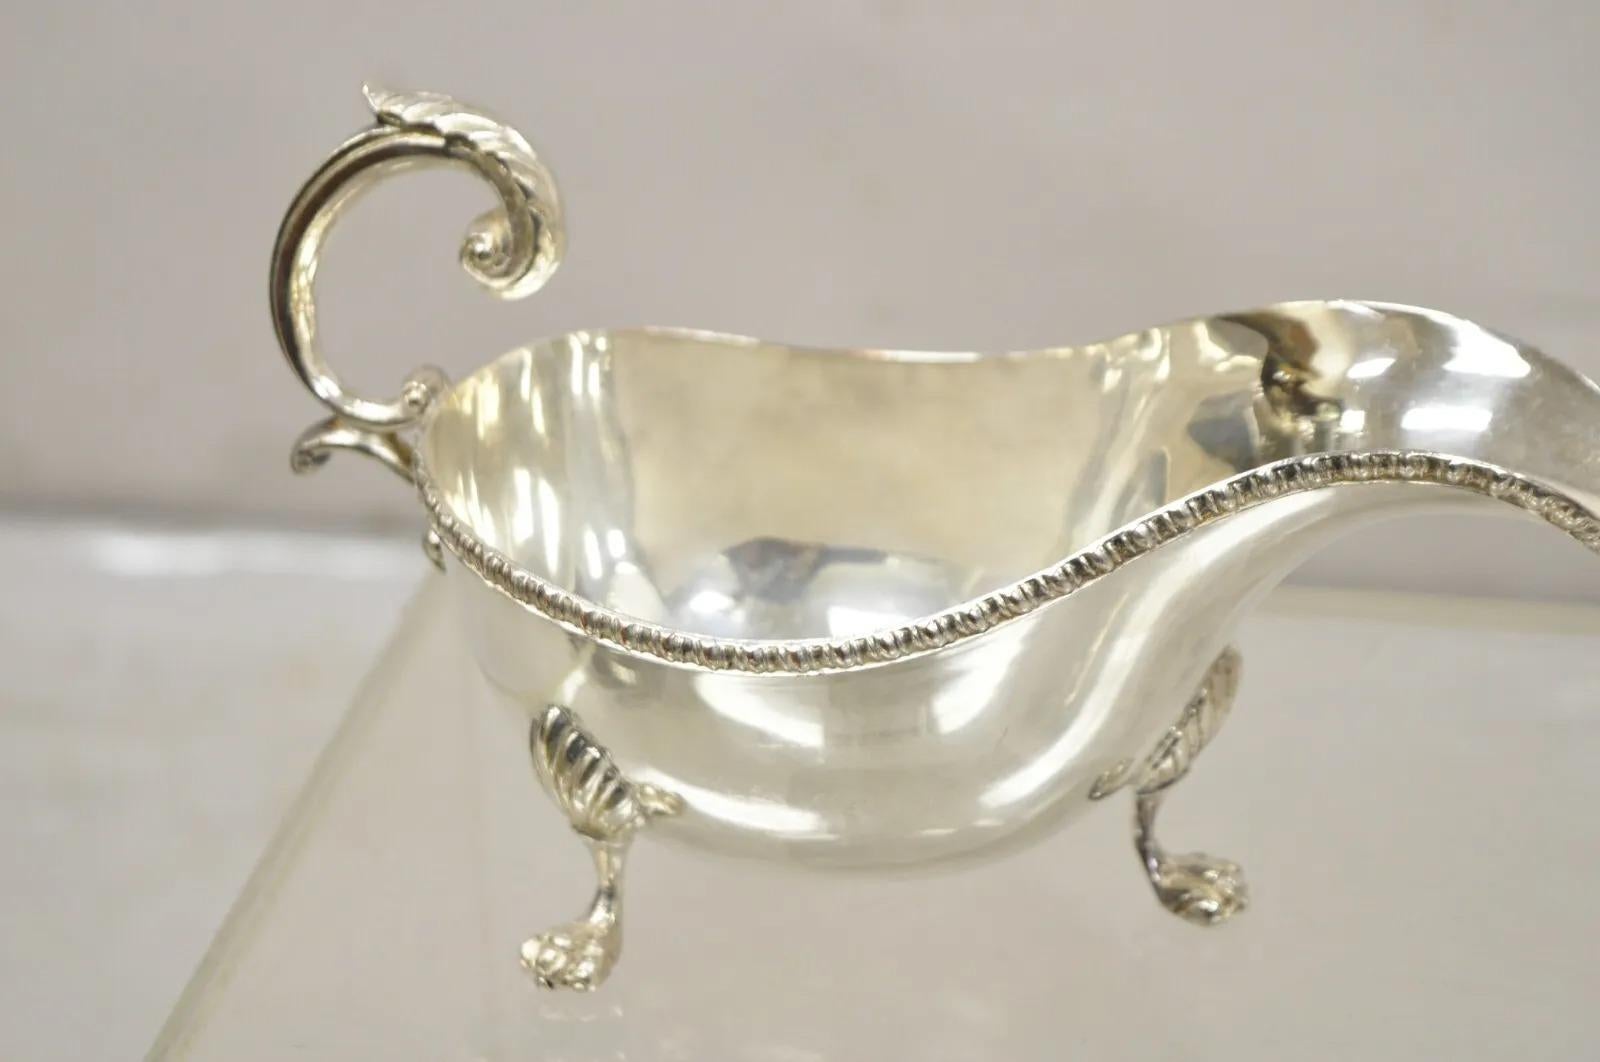 Vintage Silver Plated Victorian Serving Gravy Boat Sauce Boats - Lot of 6 For Sale 1